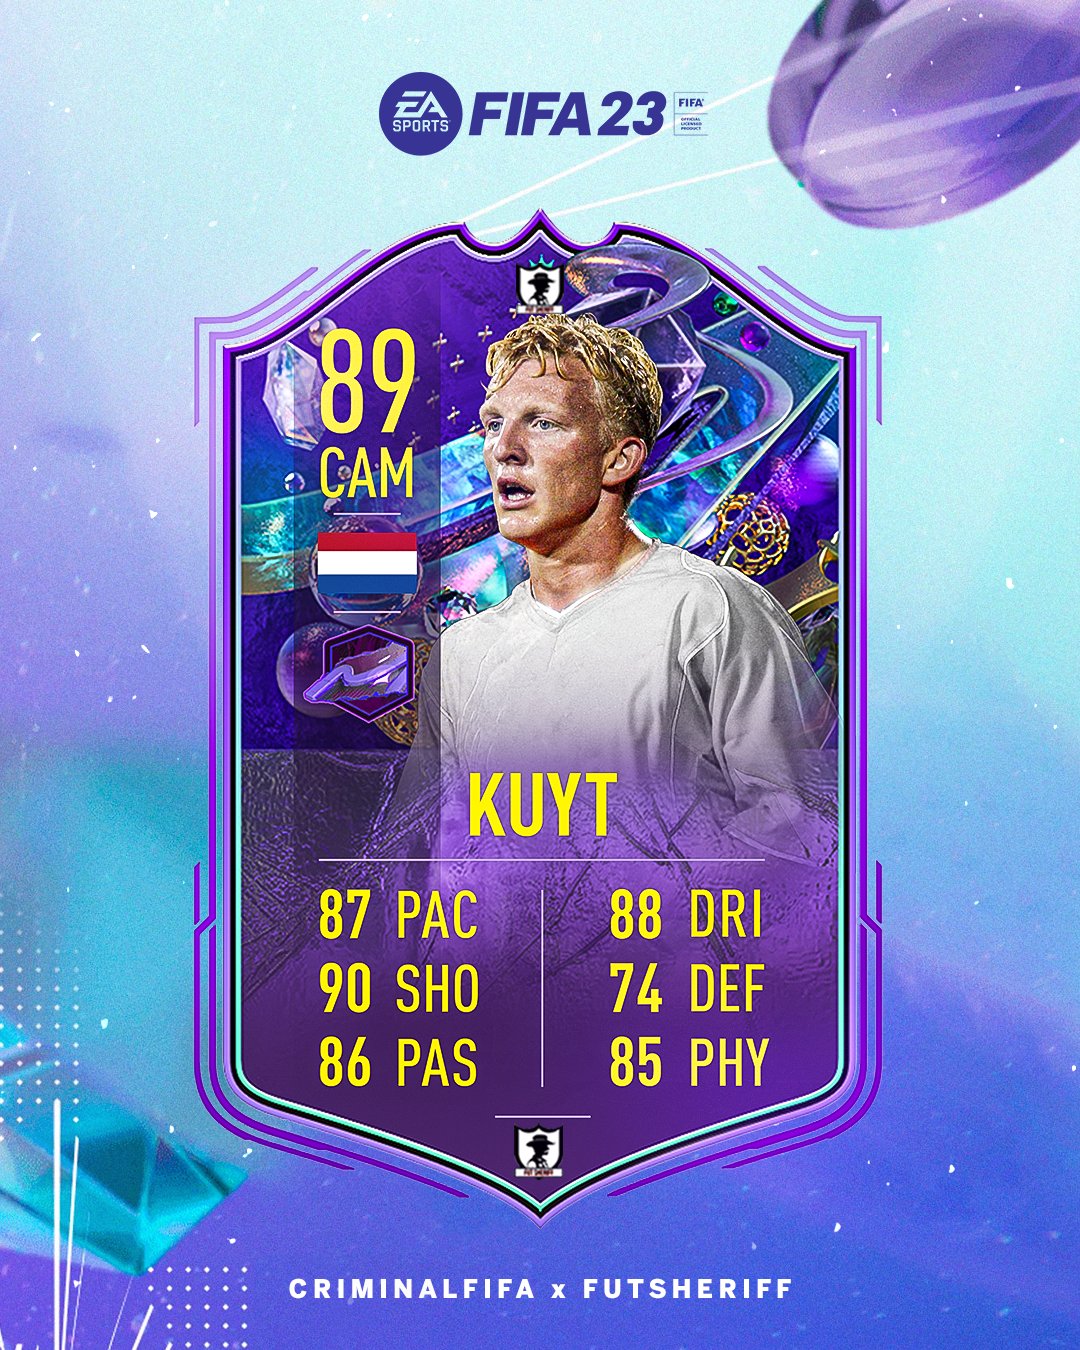 FUT Sheriff - 💥Kuyt 🇳🇱 has a card listed to come as